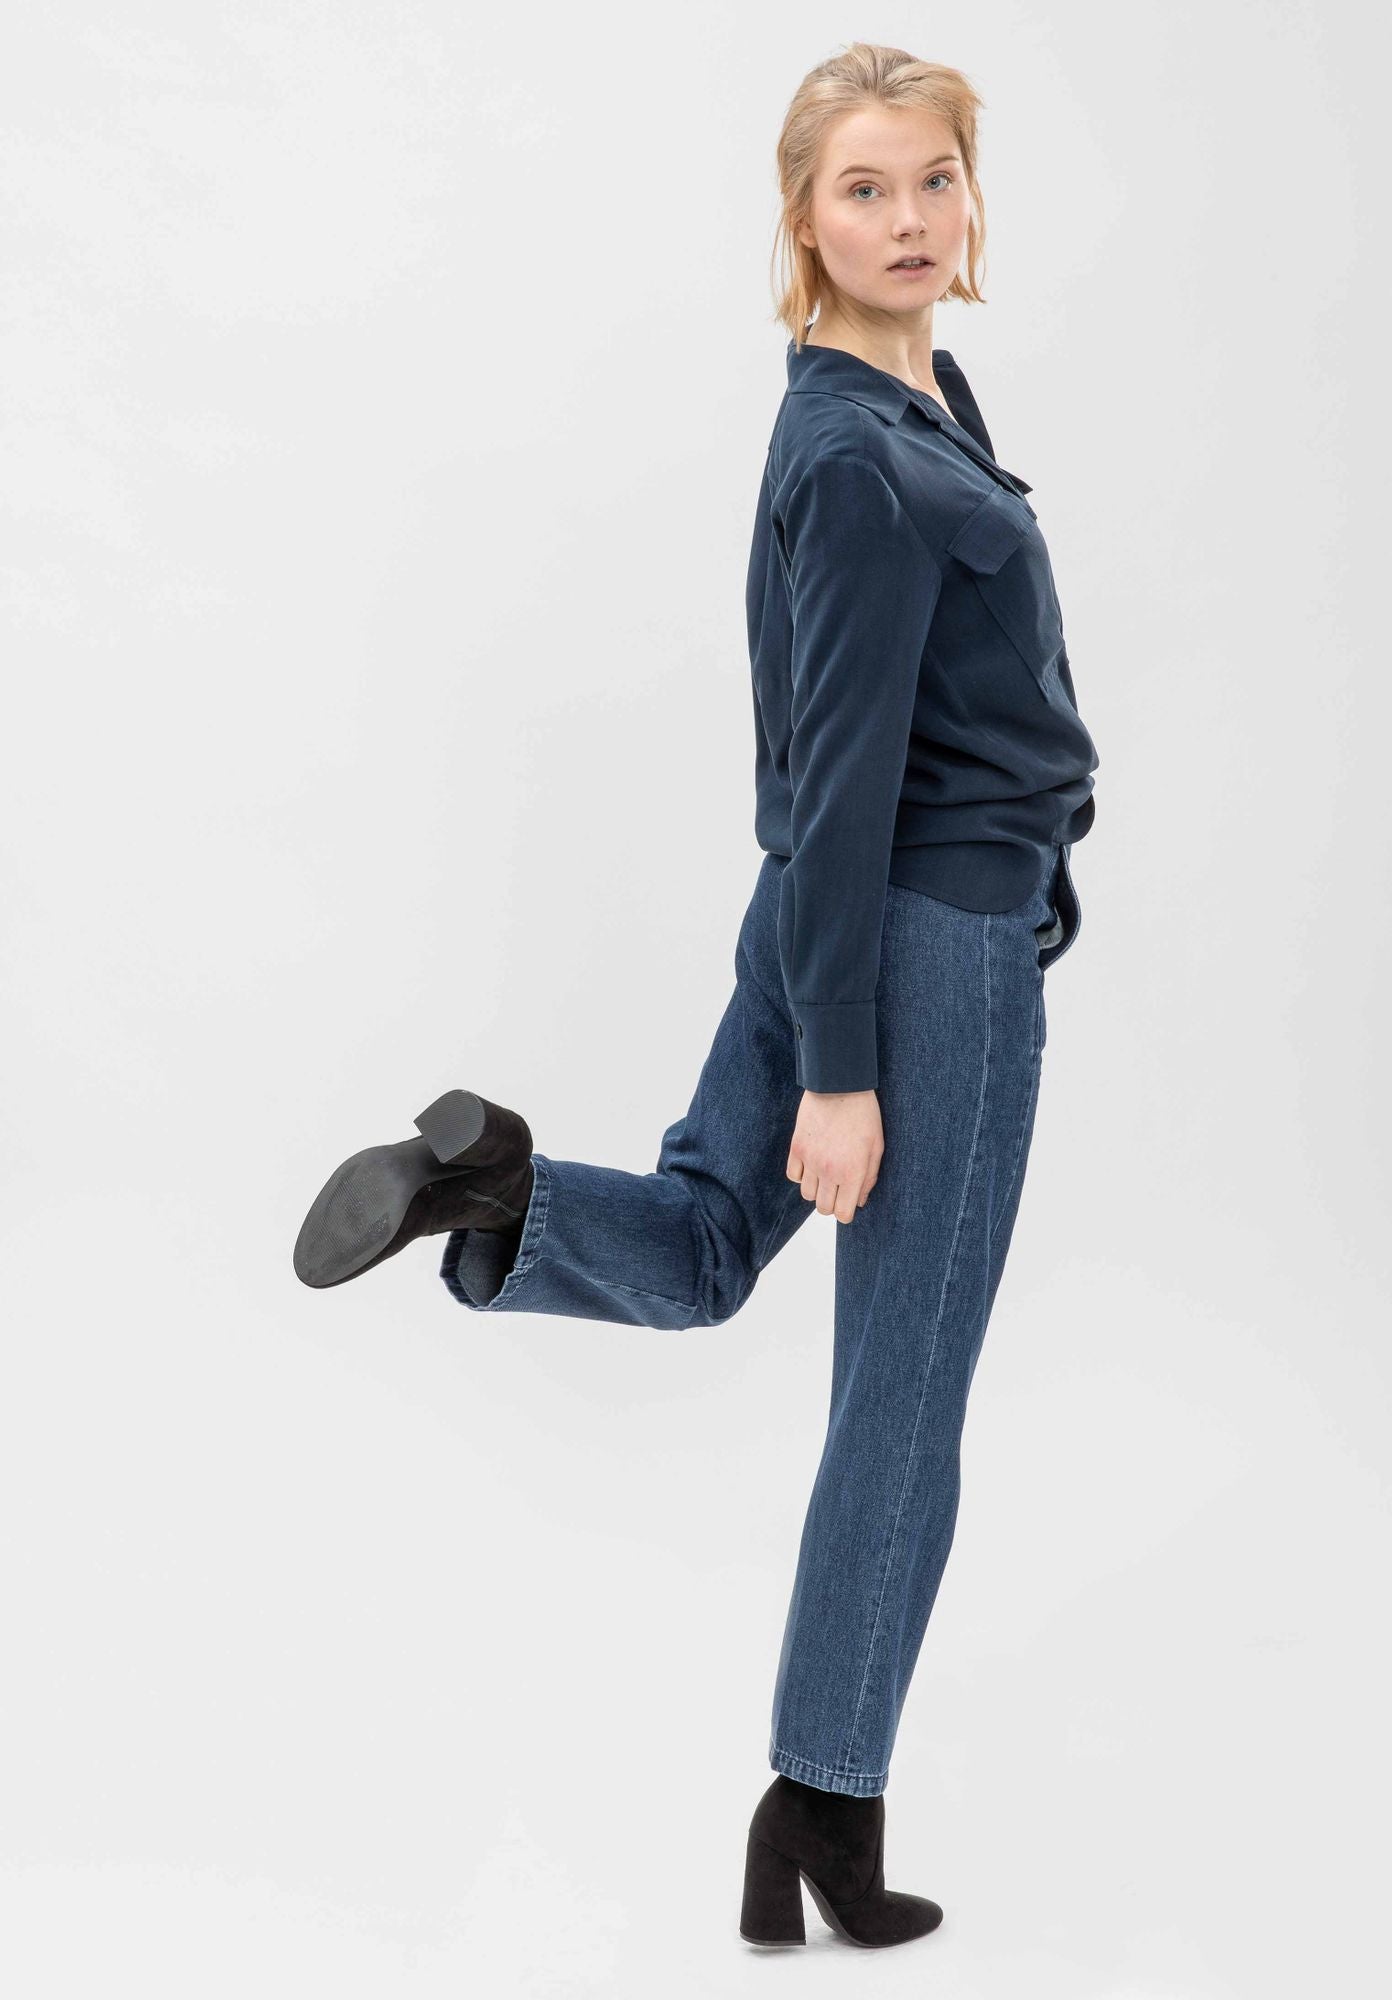 Jeans GREVIE in dark blue by LOVJOI made of organic cotton